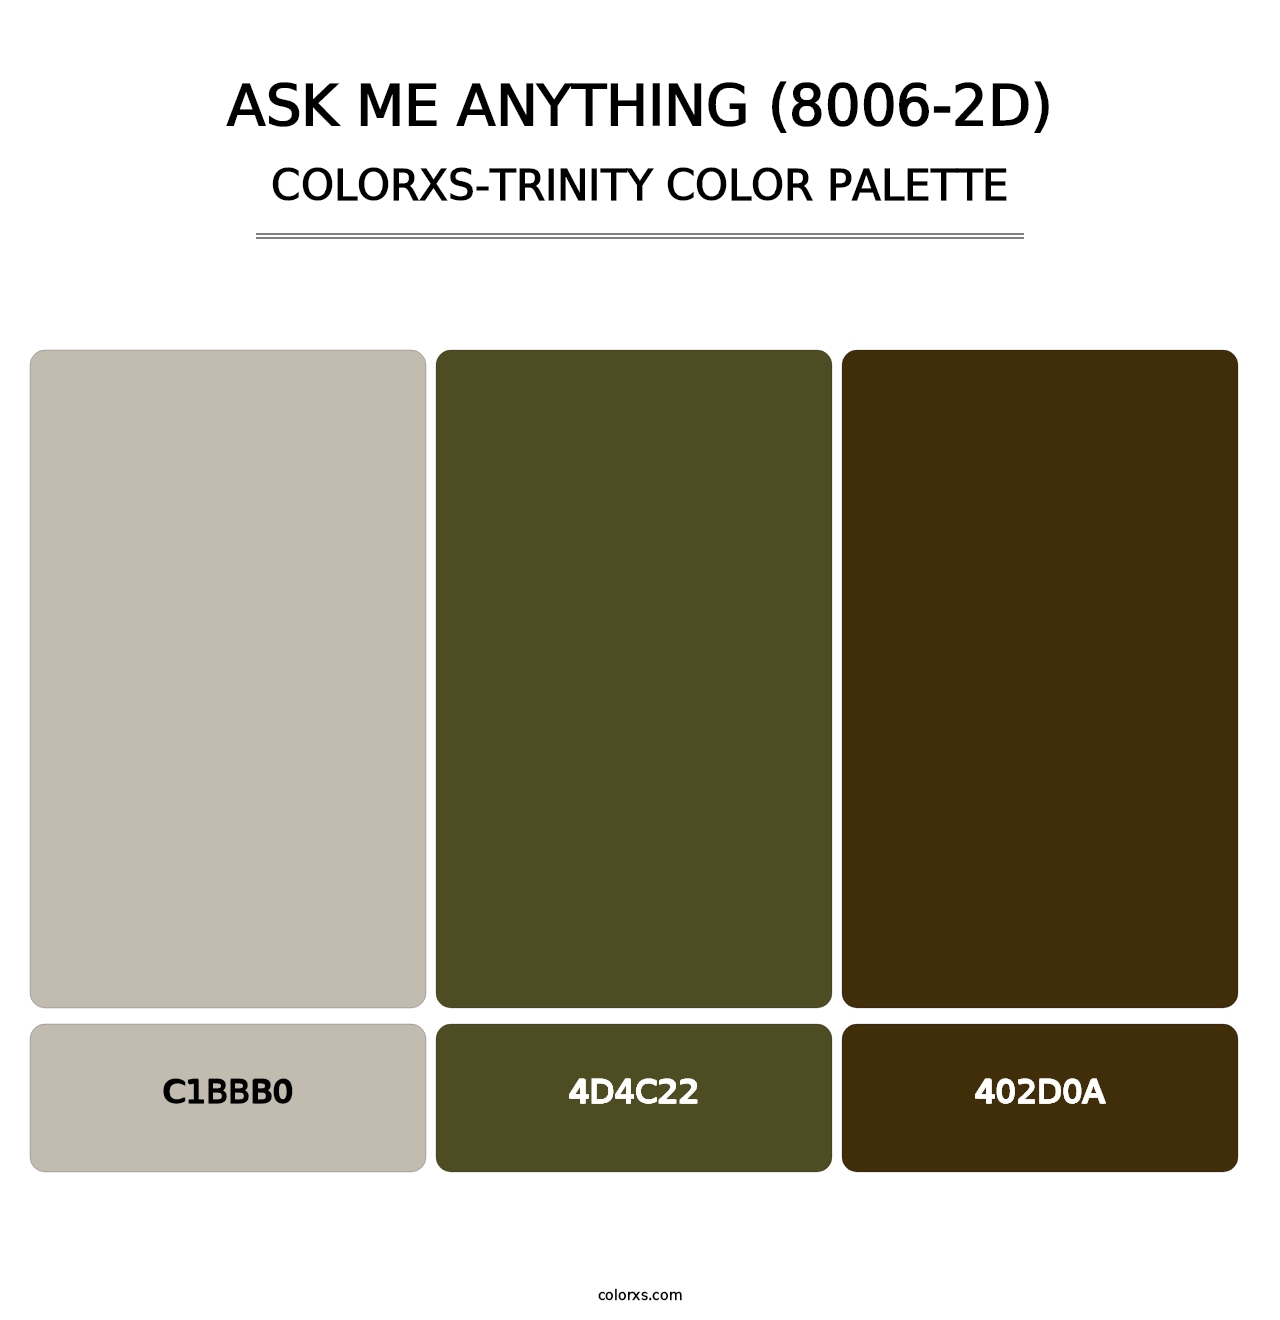 Ask Me Anything (8006-2D) - Colorxs Trinity Palette